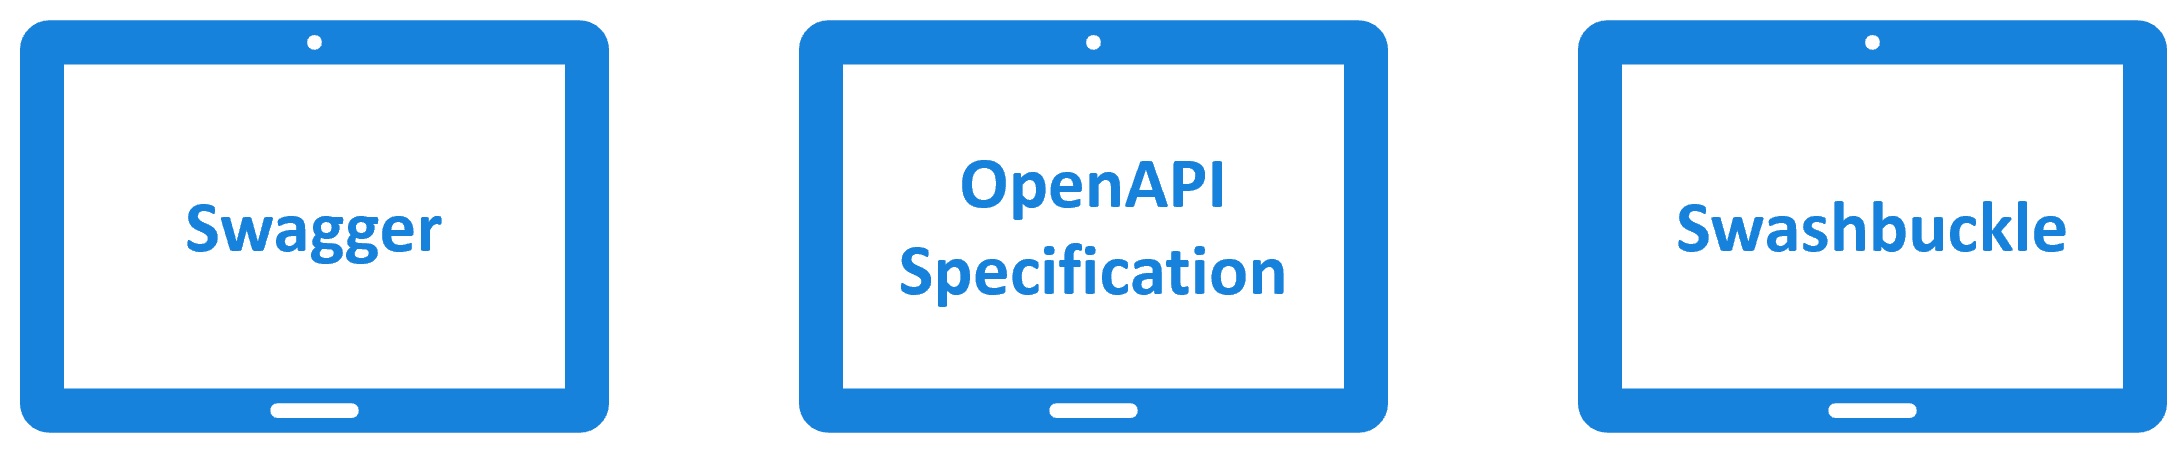 difference between swagger and openapi